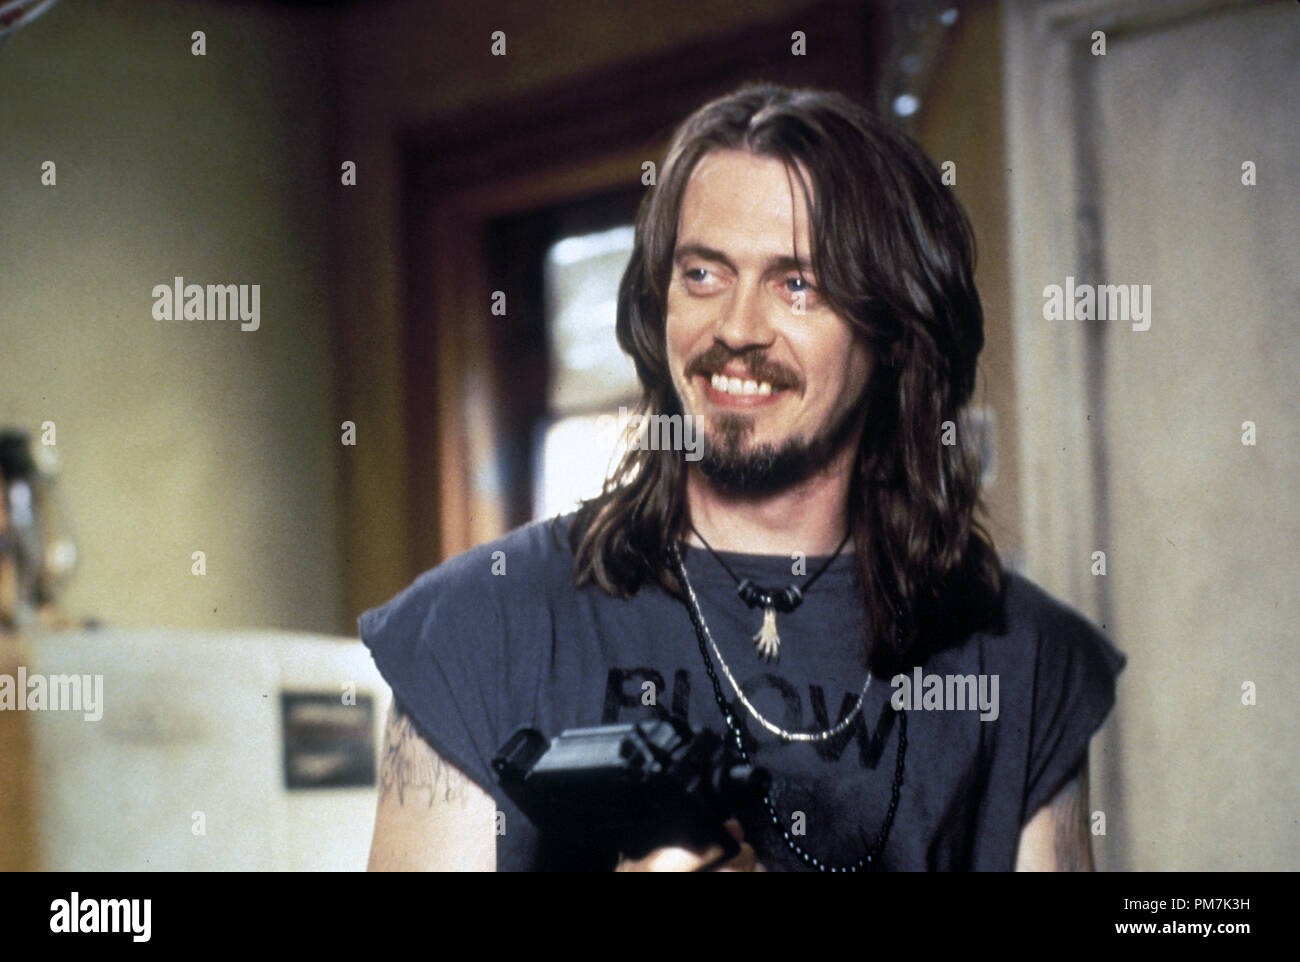 Film Still from "Airheads" Steve Buscemi © 1994 20th Century Fox Photo Credit: Robert Isenberg    File Reference # 31129453THA  For Editorial Use Only - All Rights Reserved Stock Photo